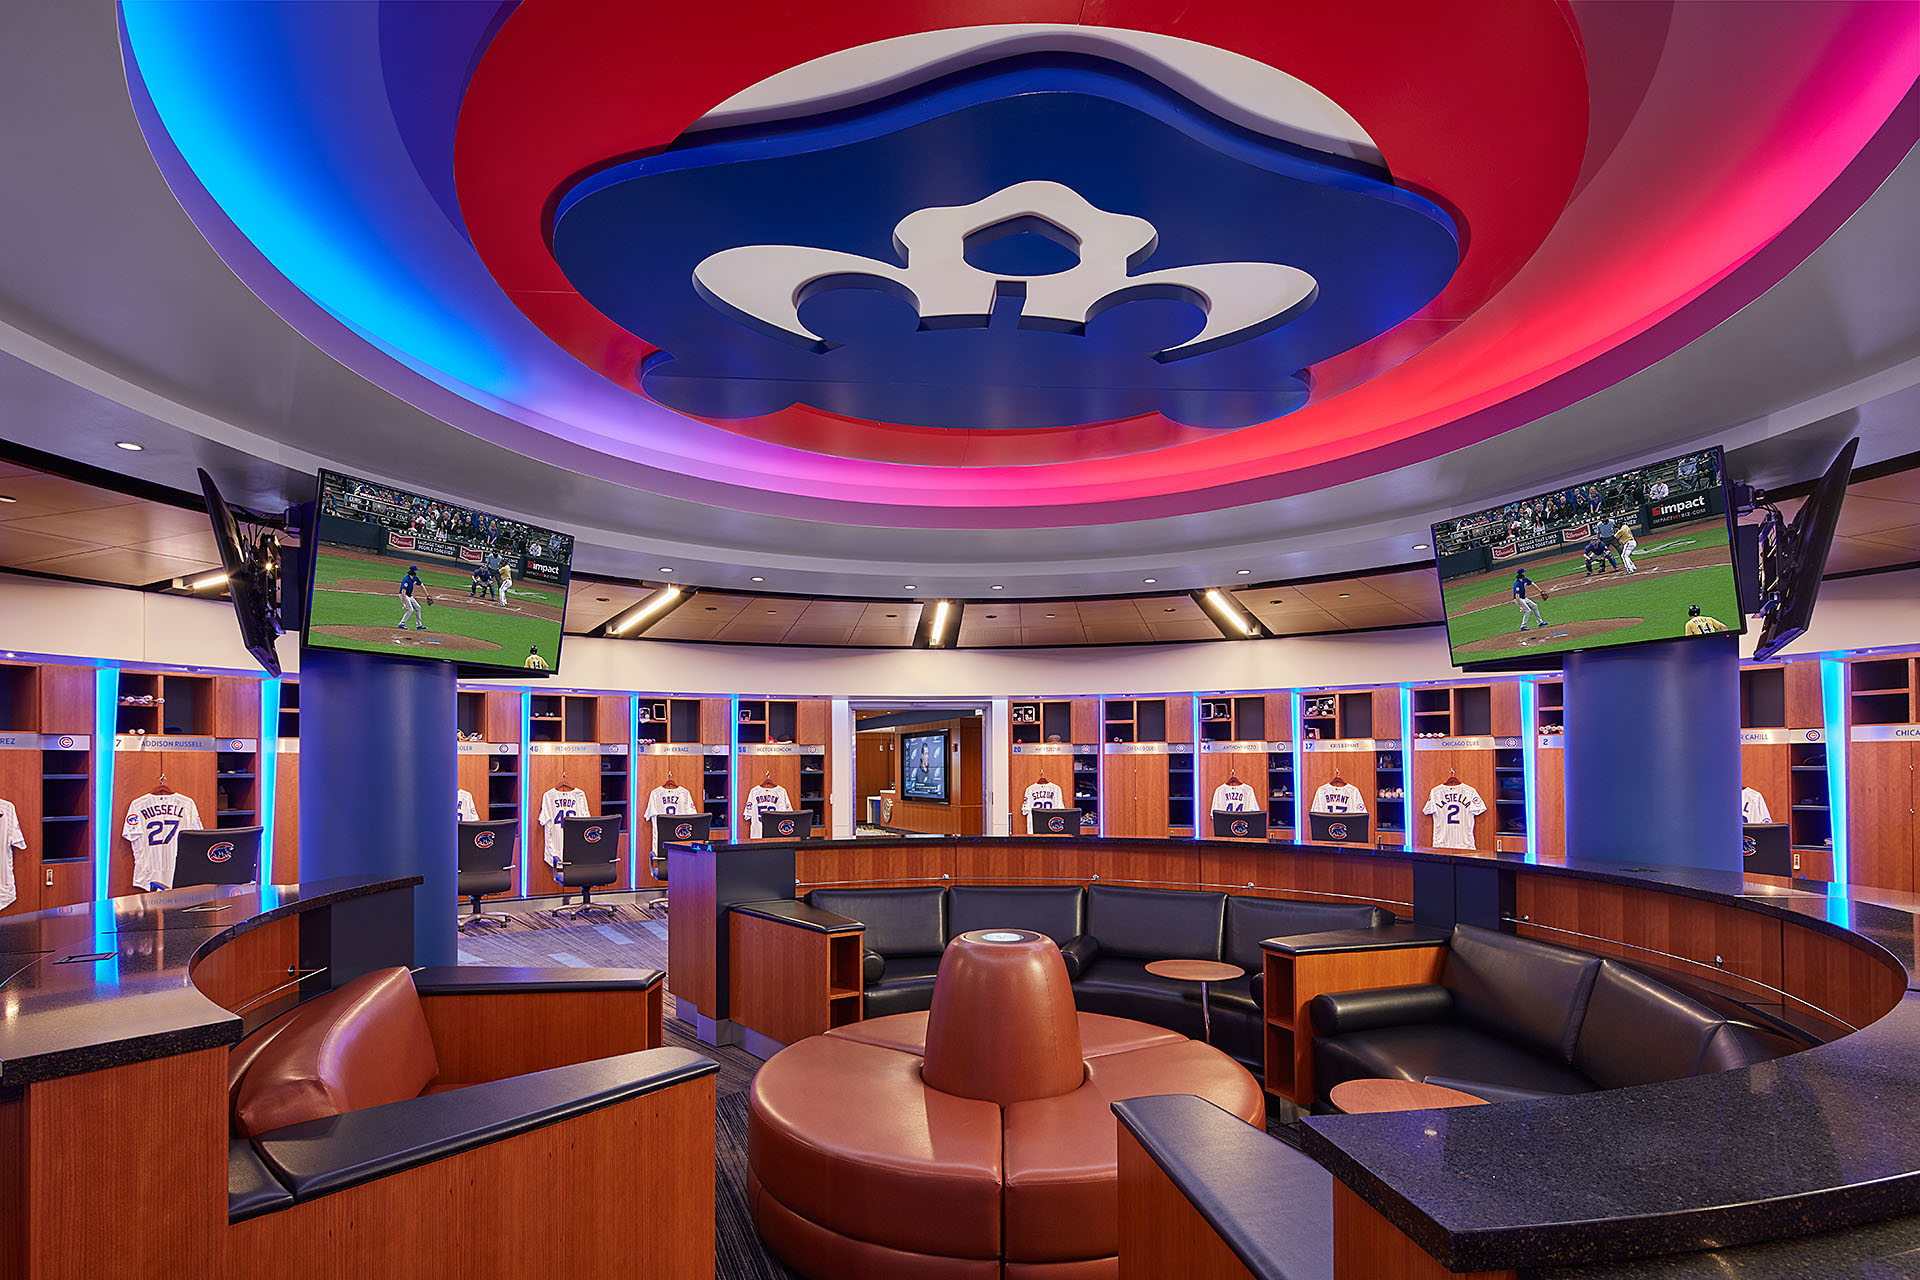 Inside the Cubs' vast Wrigley Field clubhouse